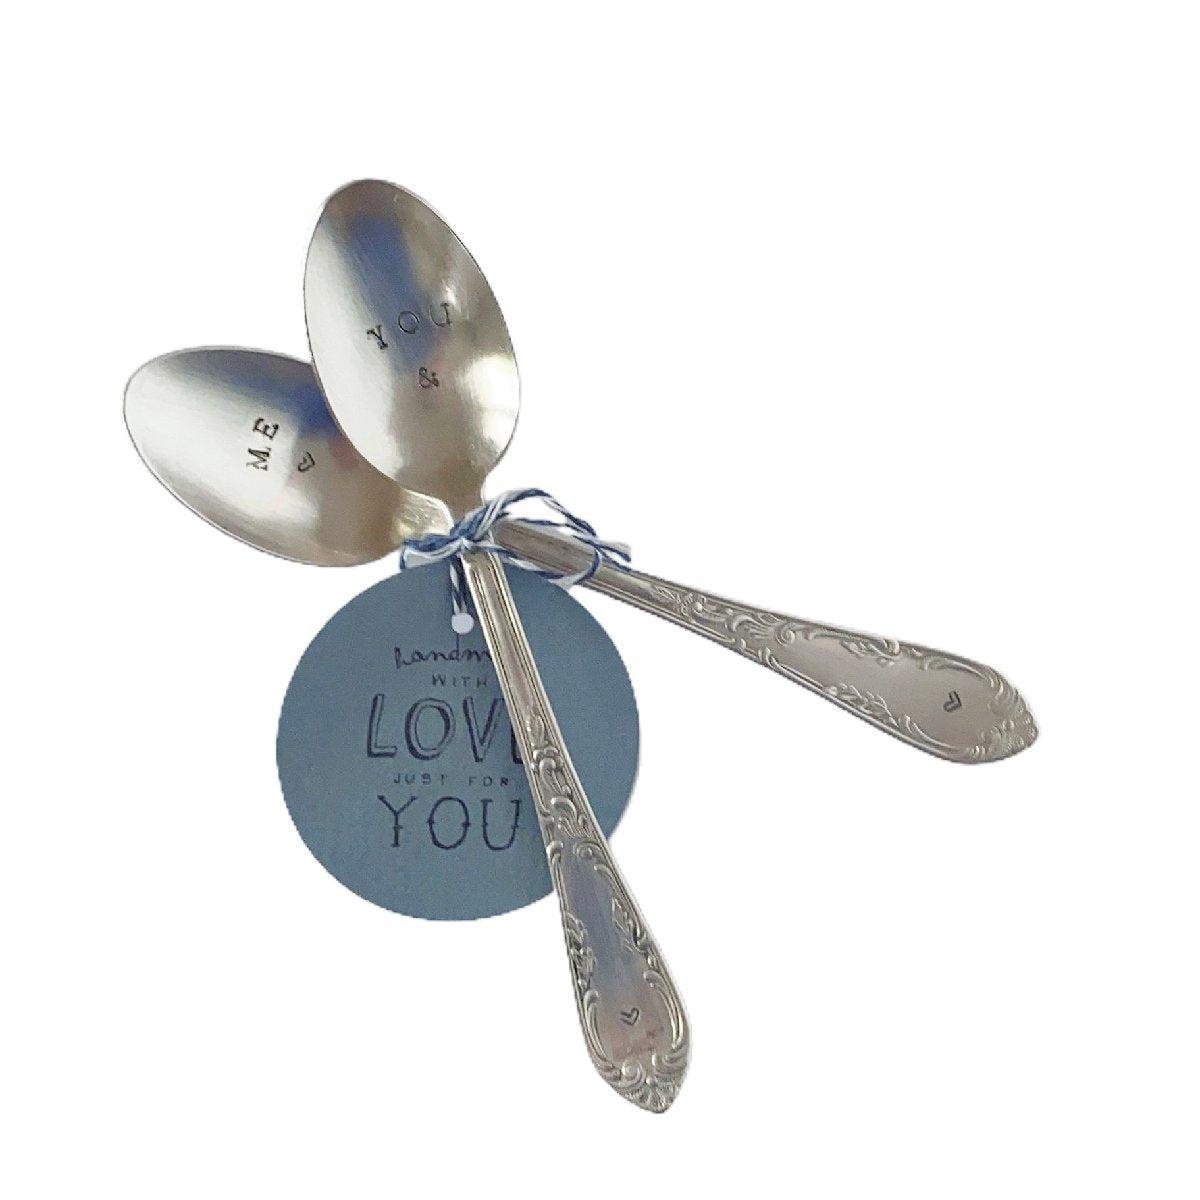 antique silverware teaspoons | "you and me"